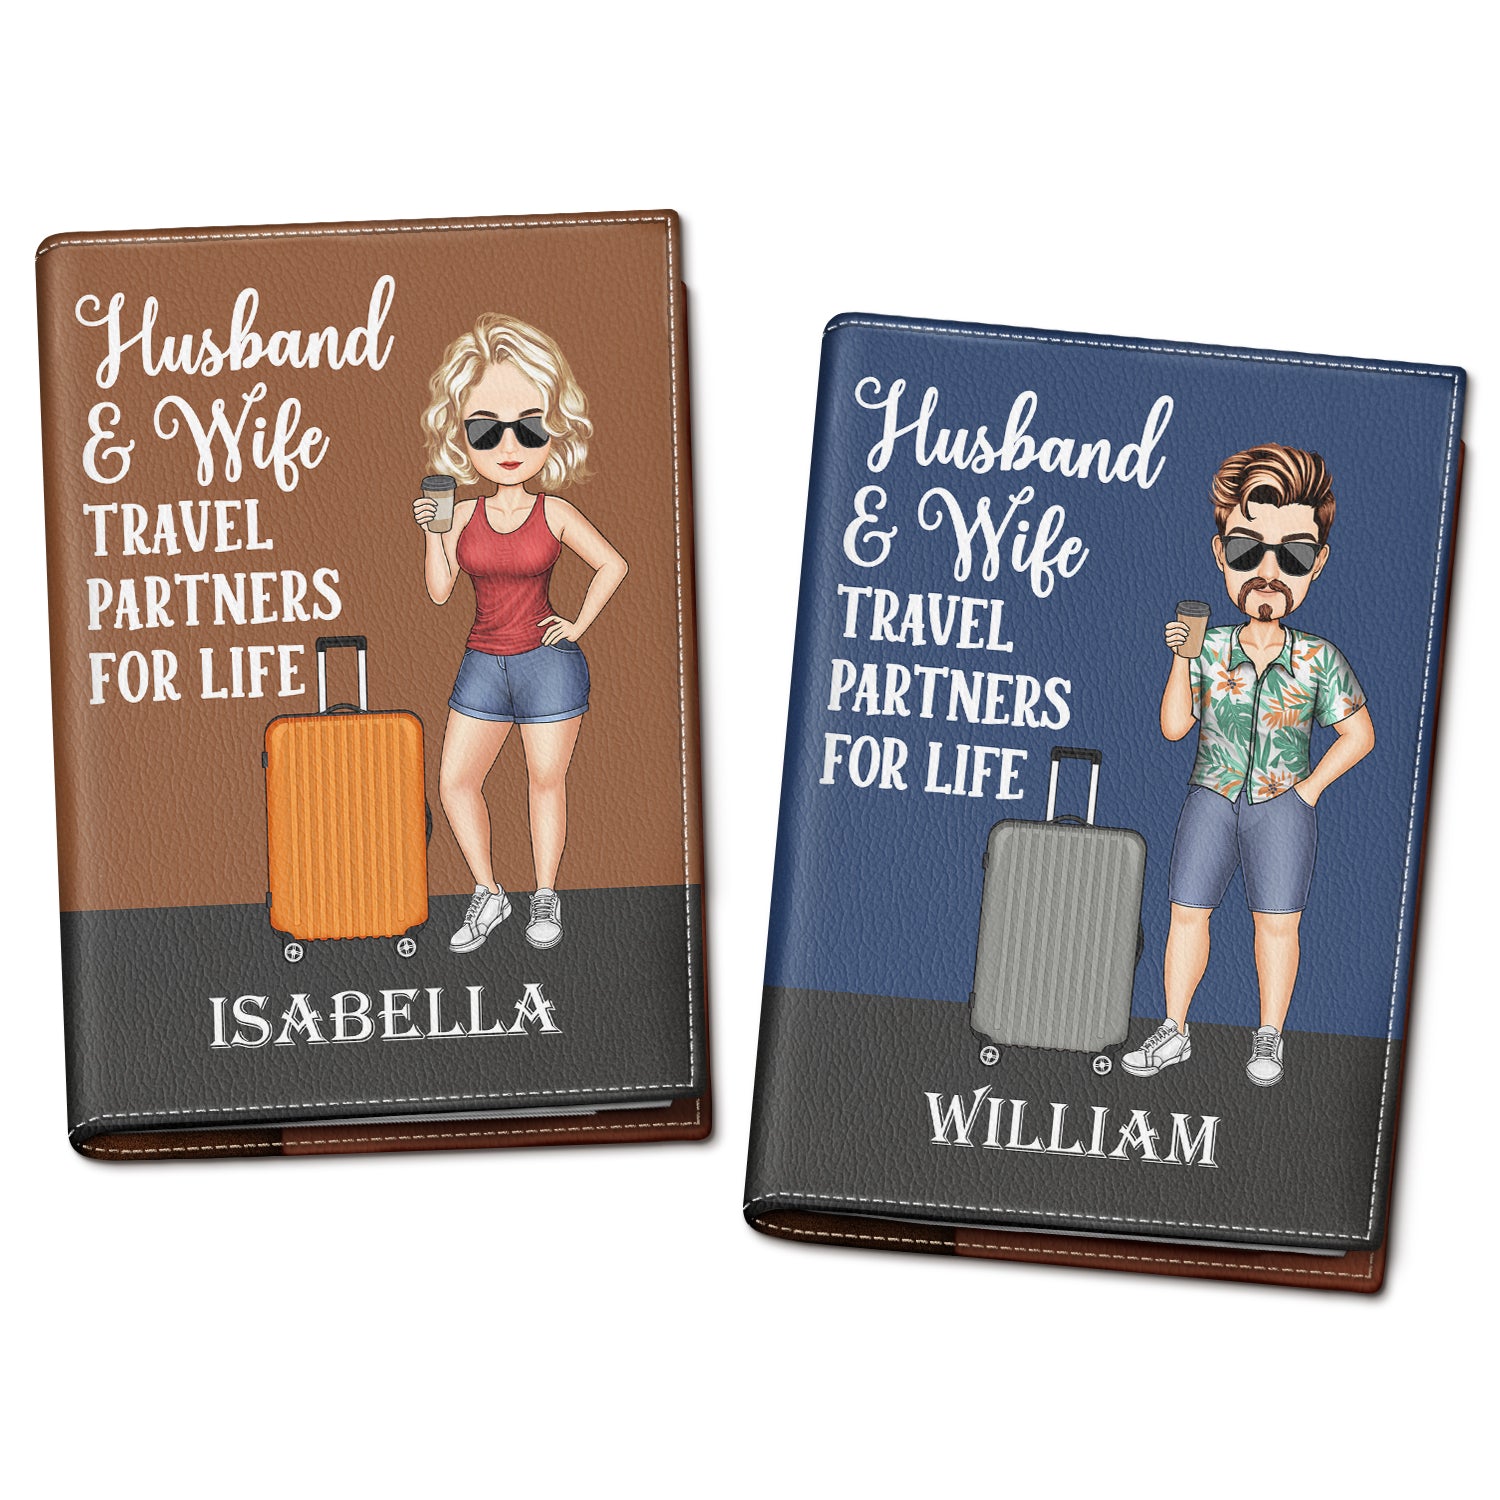 Husband And Wife Travel Partners For Life Traveling - Anniversary, Vacation, Funny Gift For Couples, Family, Husband, Wife - Personalized Passport Cover, Passport Holder